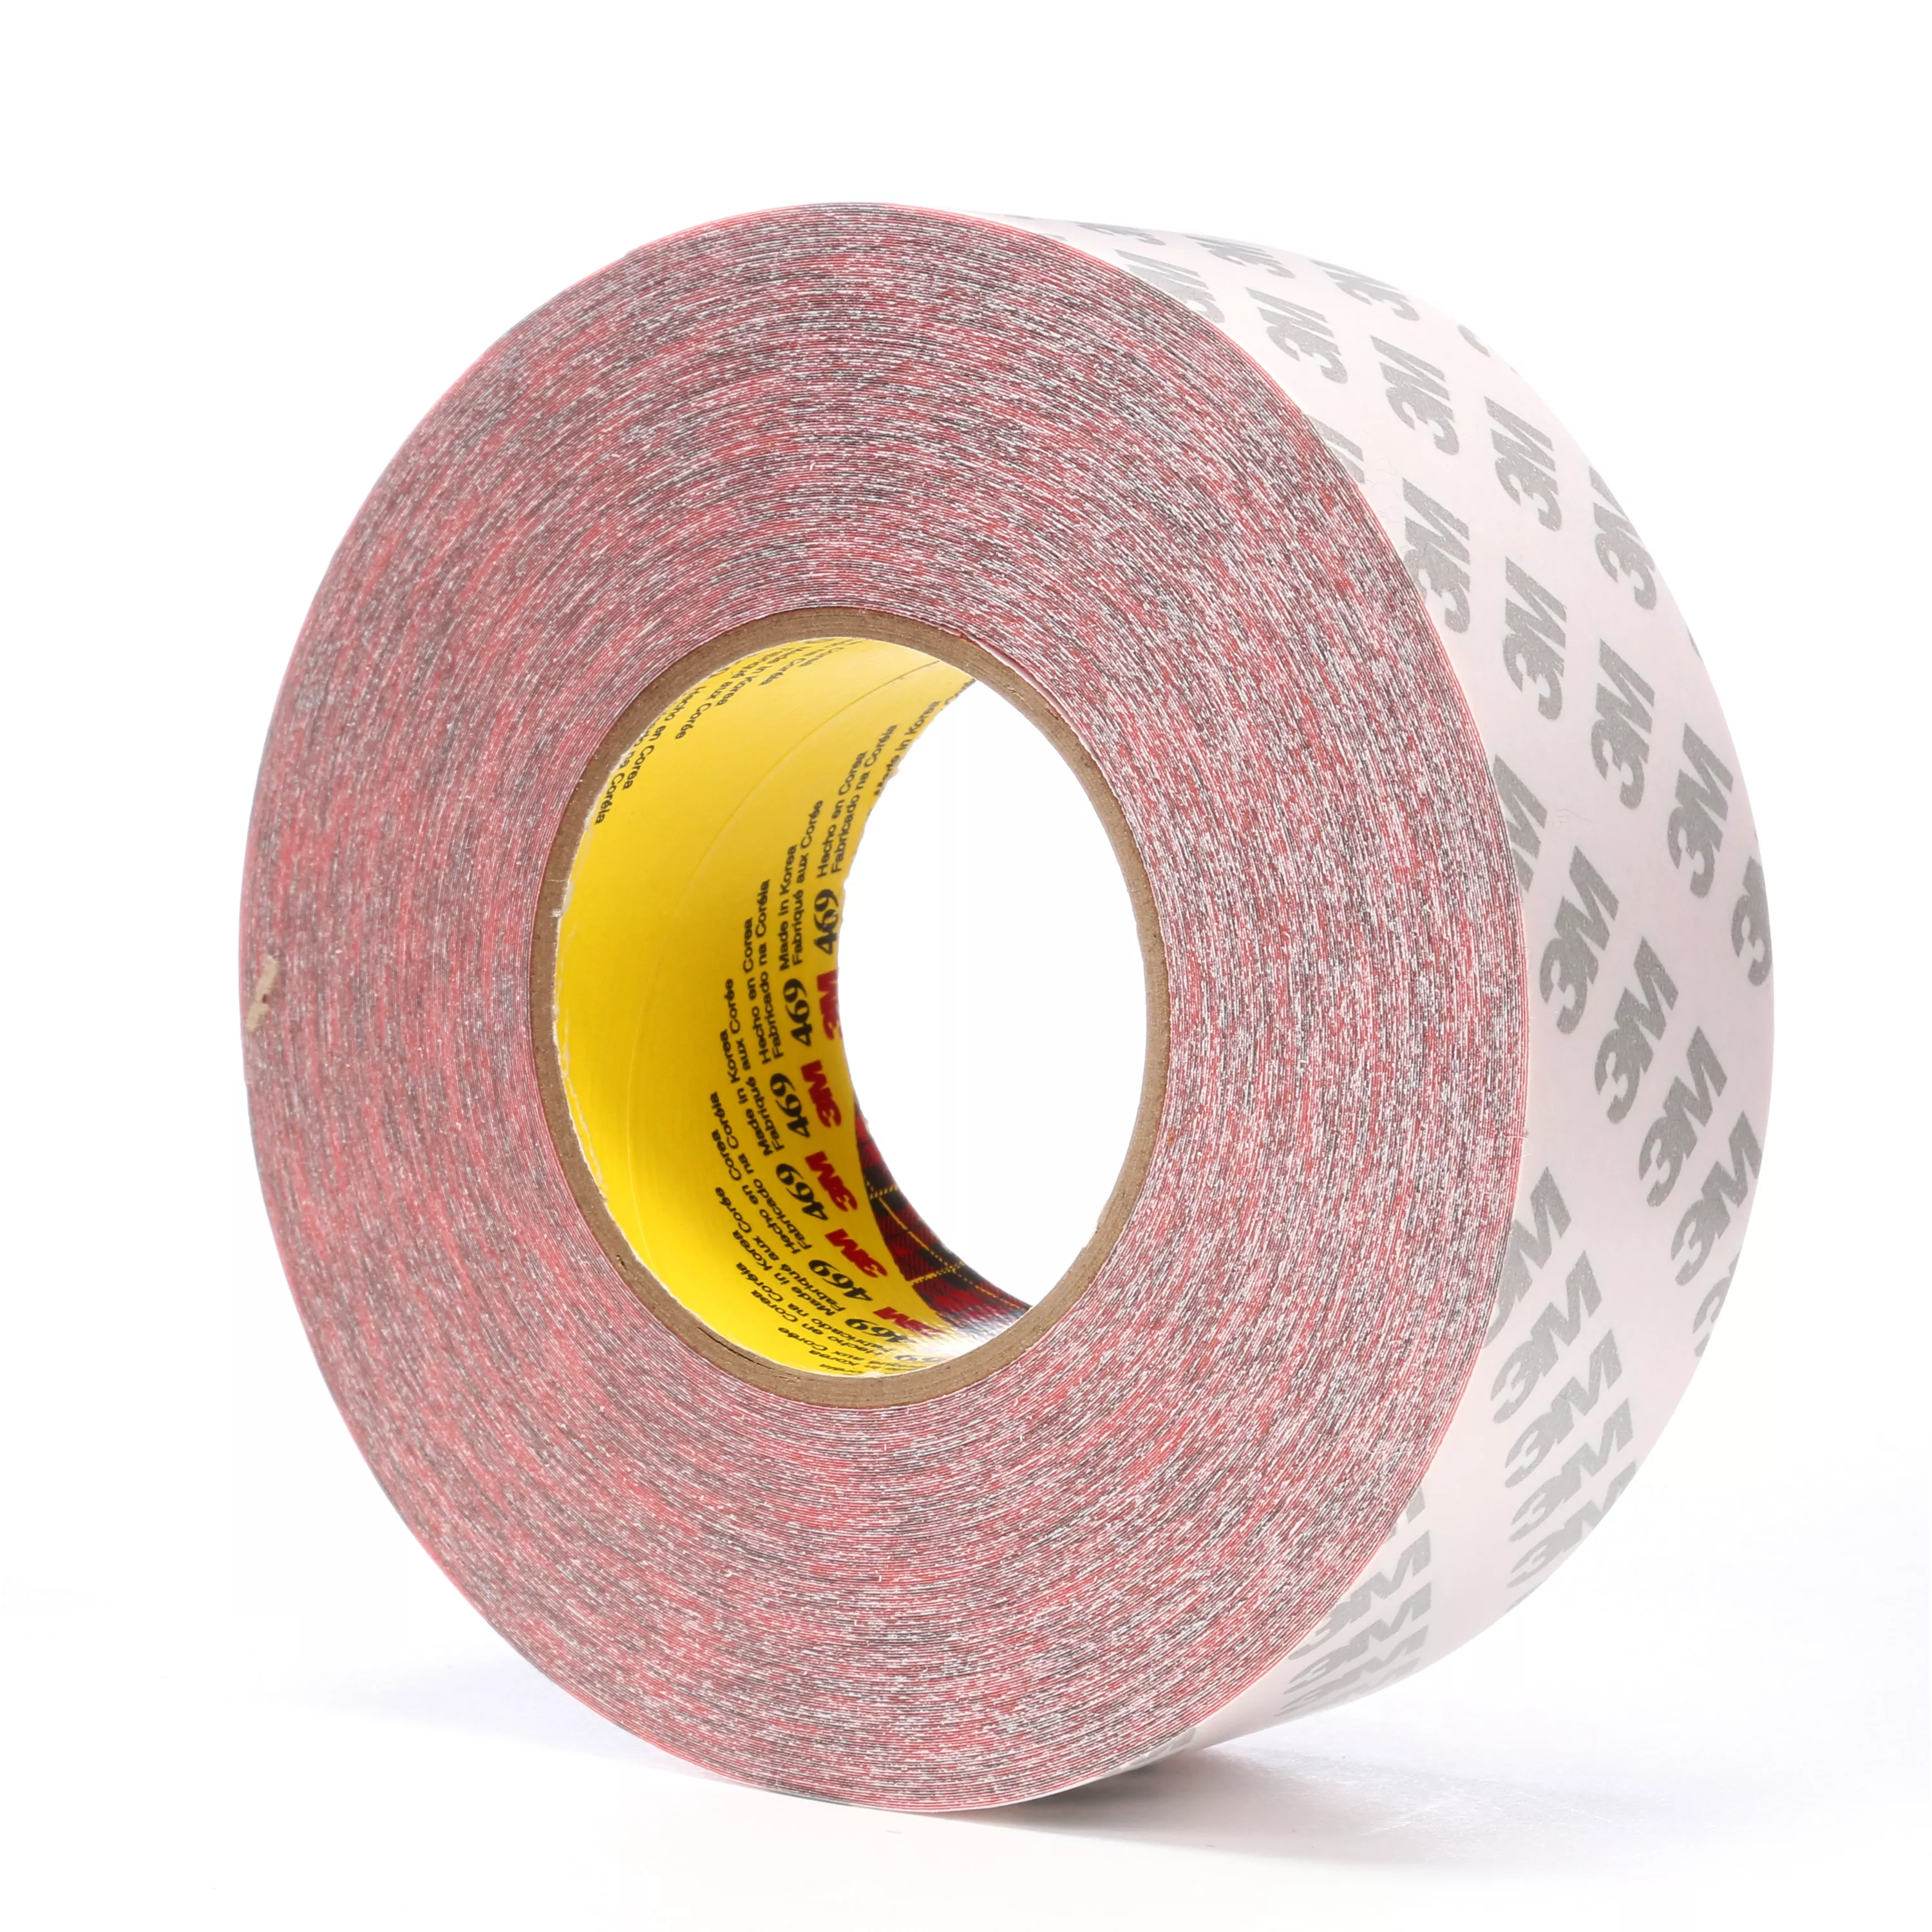 3M™ Double Coated Tape 469, Red, 2 in x 60 yd, 16 Roll/Case